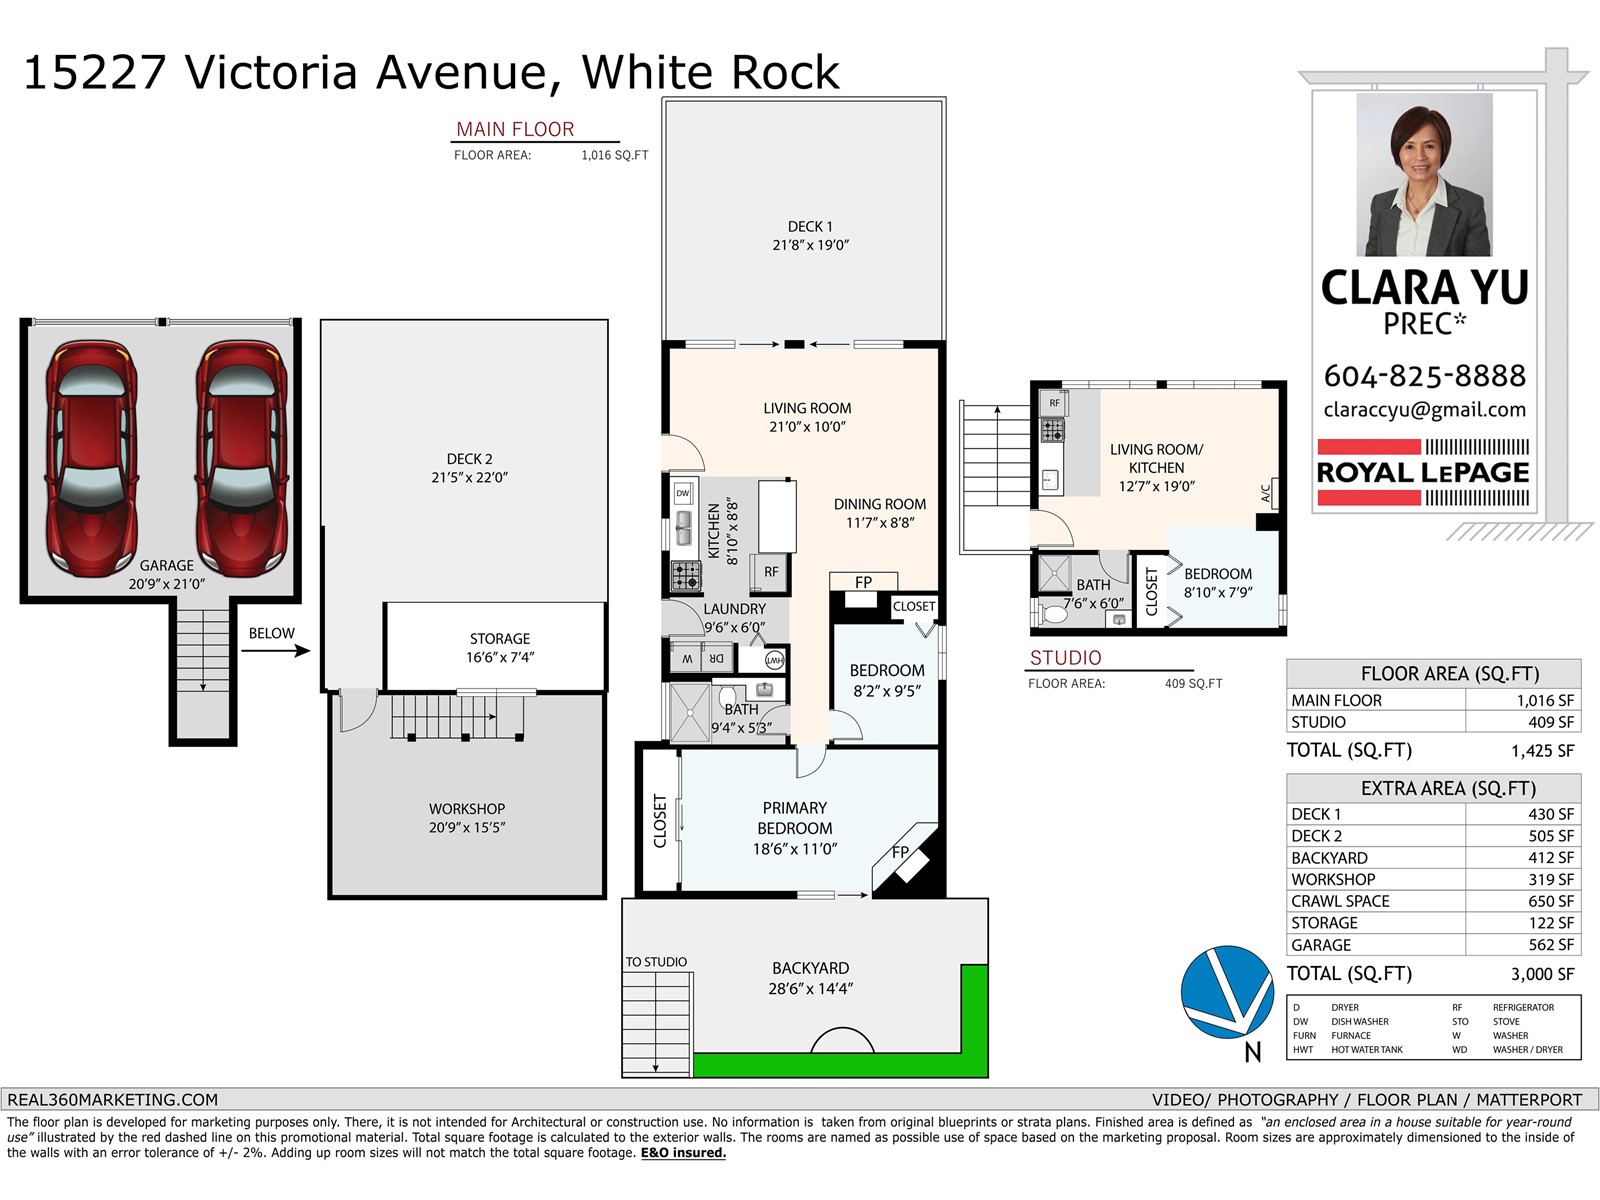 Listing Picture 29 of 29 : 15227 VICTORIA AVENUE, White Rock - 魯藝地產 Yvonne Lu Group - MLS Medallion Club Member